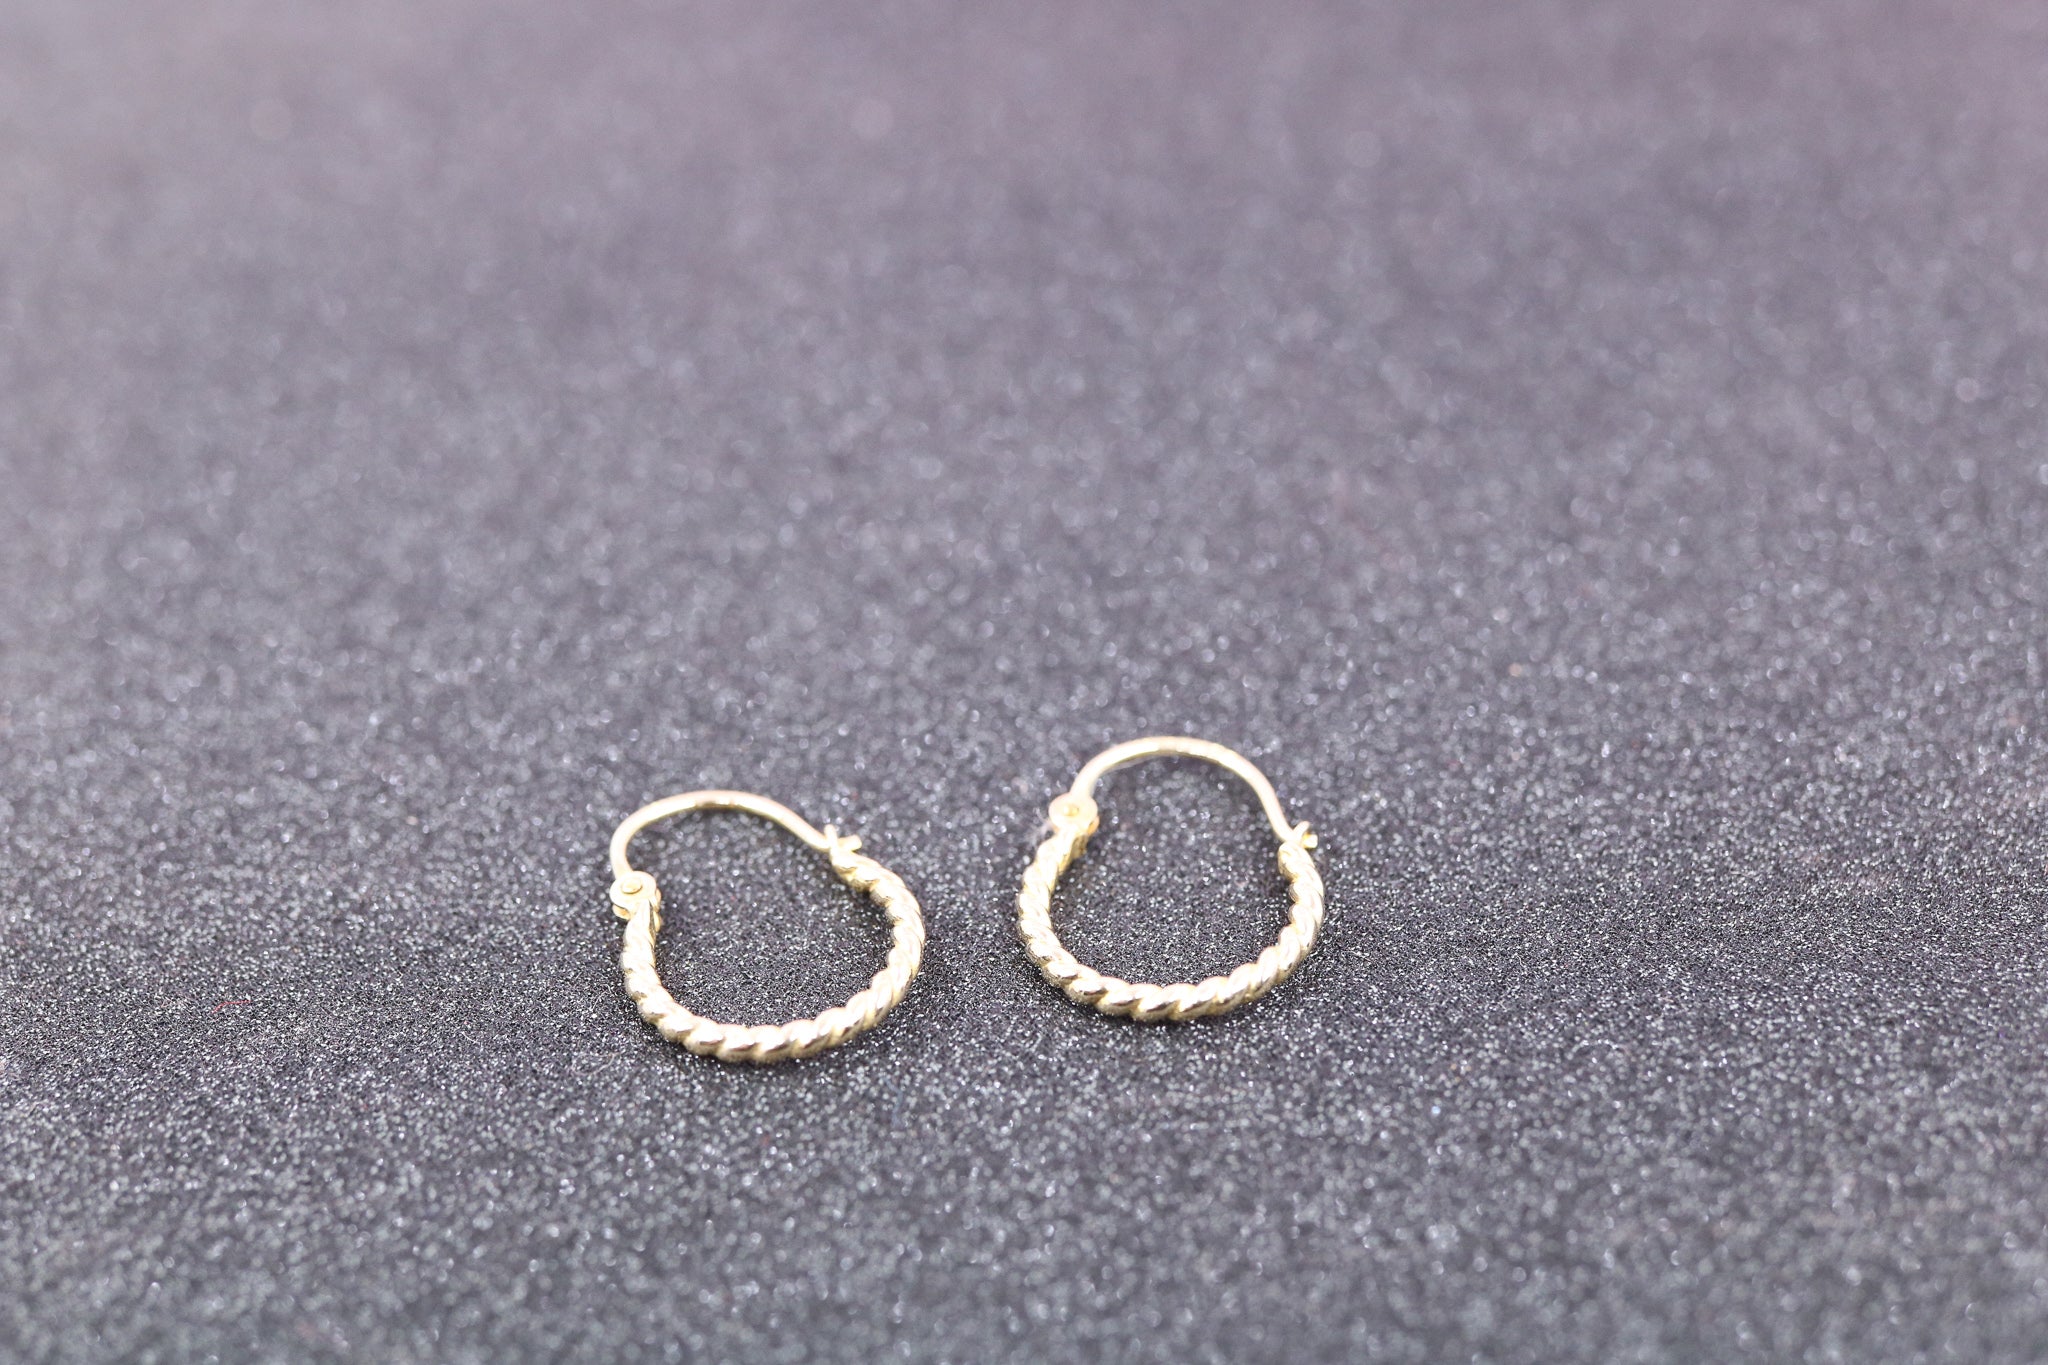 9ct Yellow Gold Earrings - HJ2760 - Hallmark Jewellers Formby & The Jewellers Bench Widnes